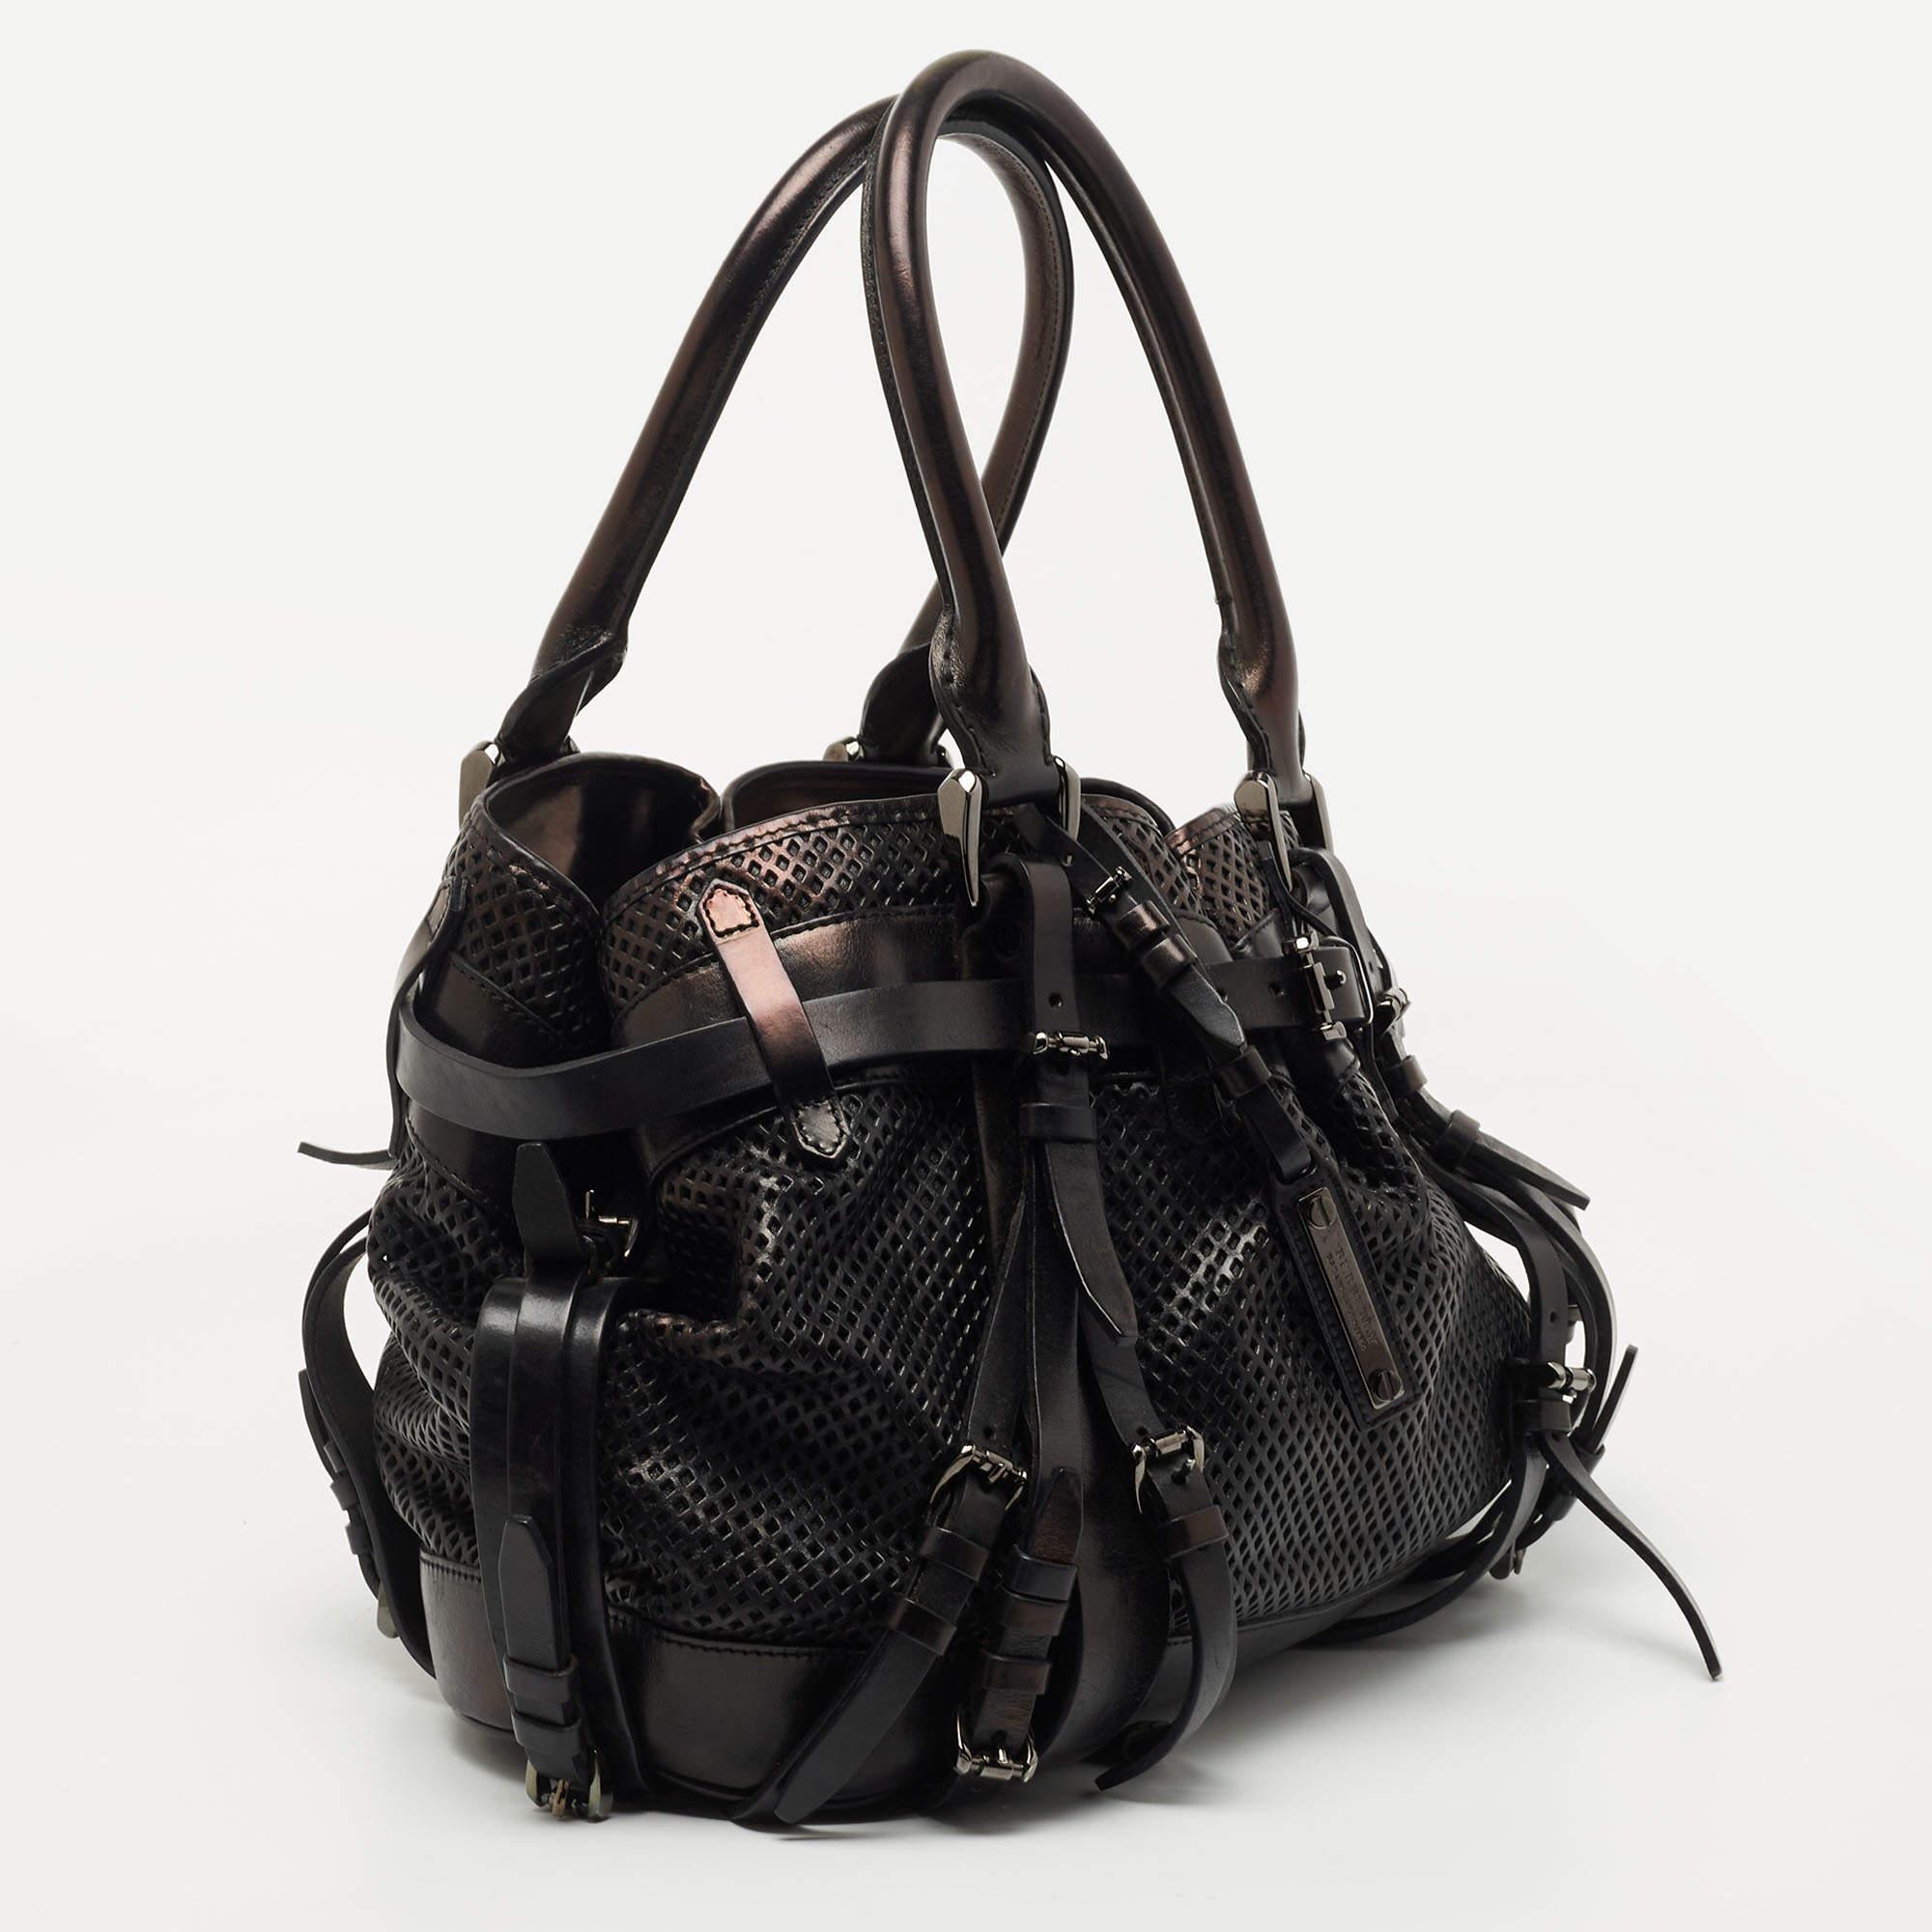 Burberry Black Perforated Leather Rowan Tote 3